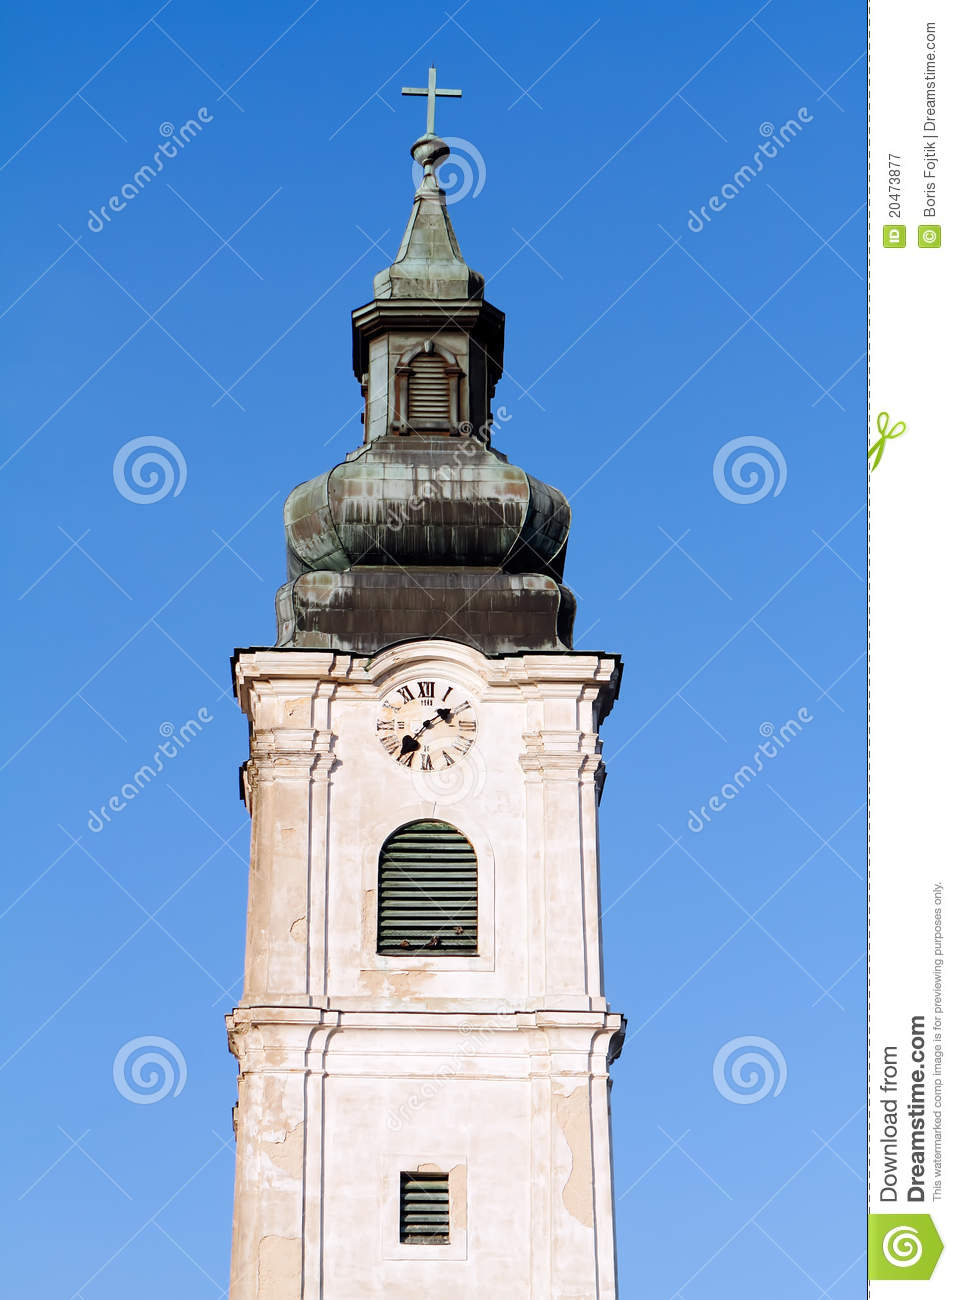 Bell Tower Of A Church Under The Blue Sky In Portrait Orientation